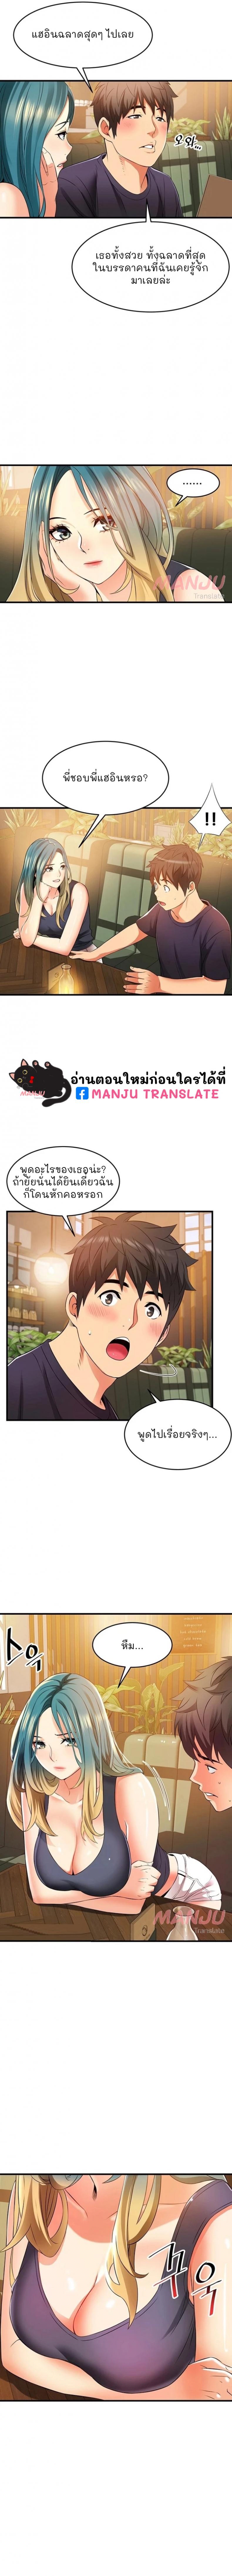 An Alley Story 9 ภาพที่ 15